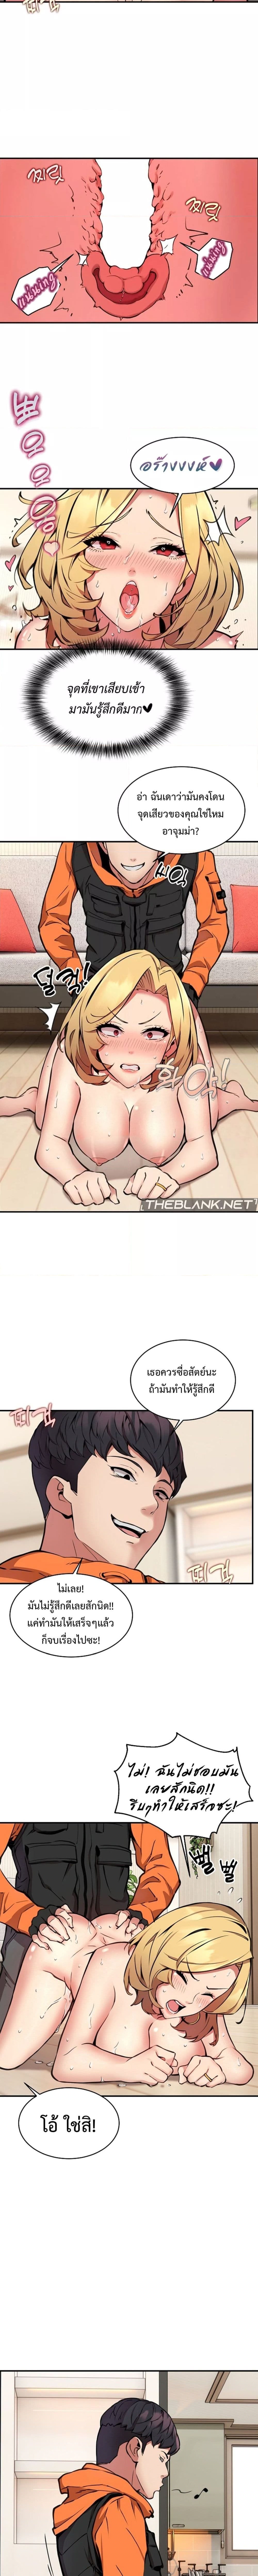 Driver in the New City ตอนที่ 5 ภาพ 3